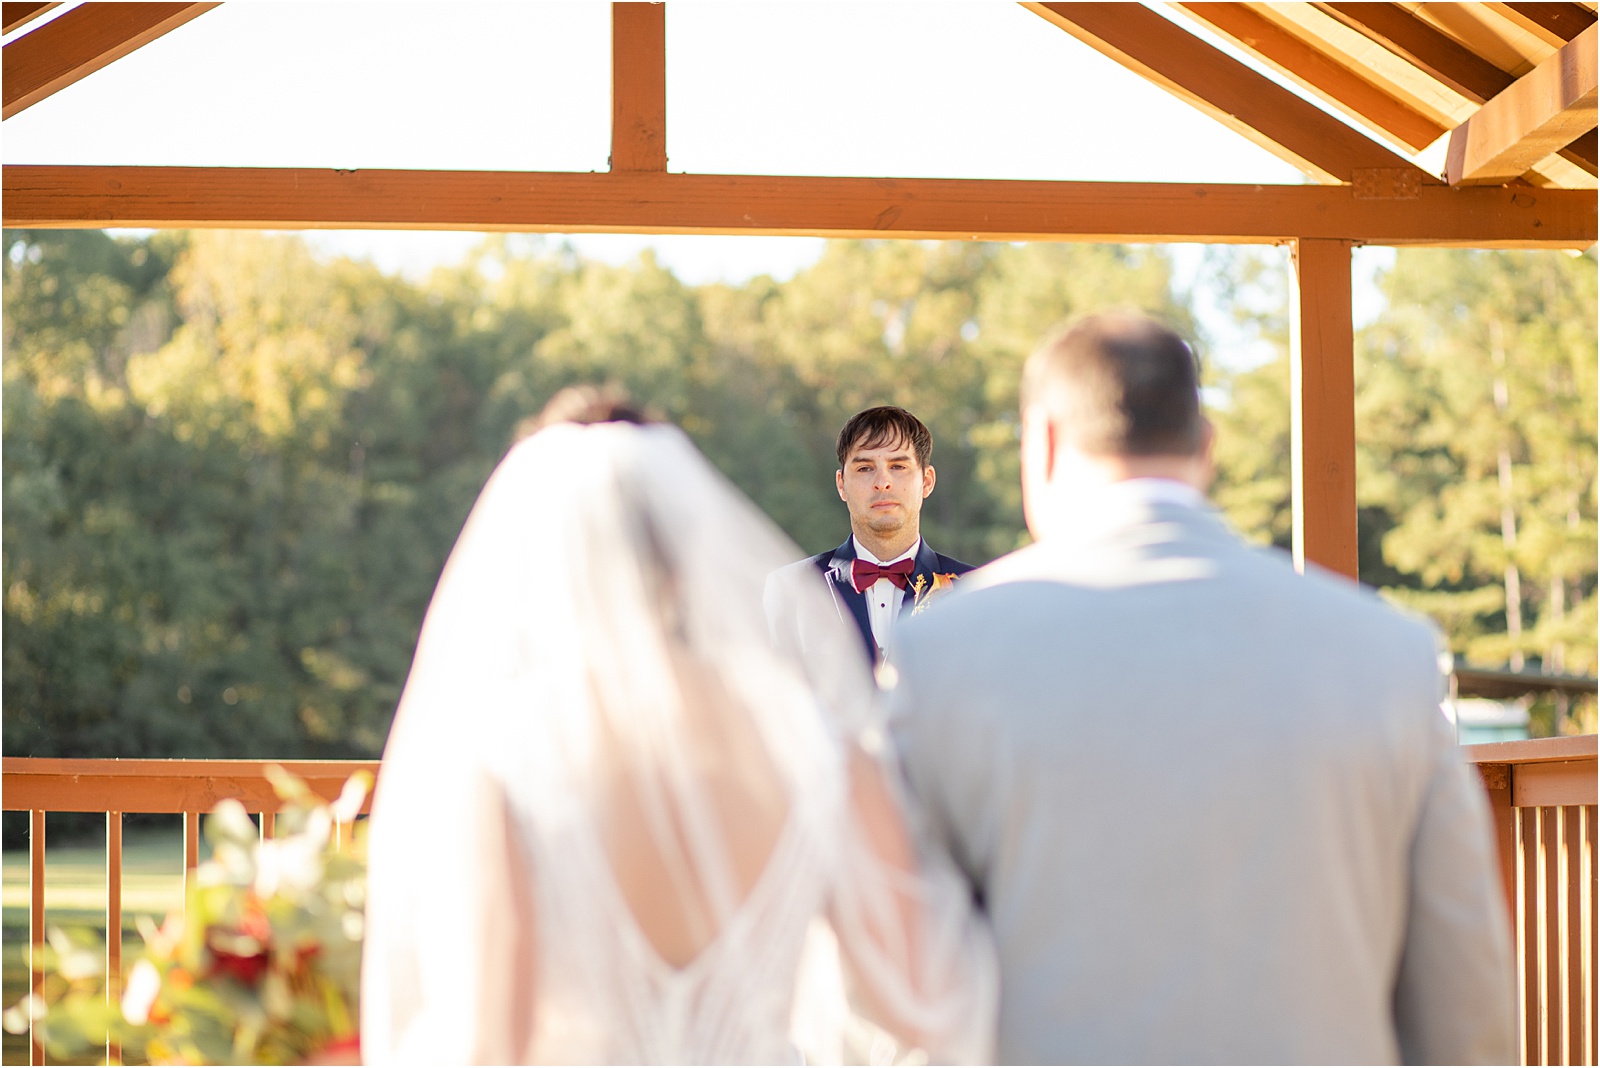 Groom looks at his bride as she walks down the aisle with her father